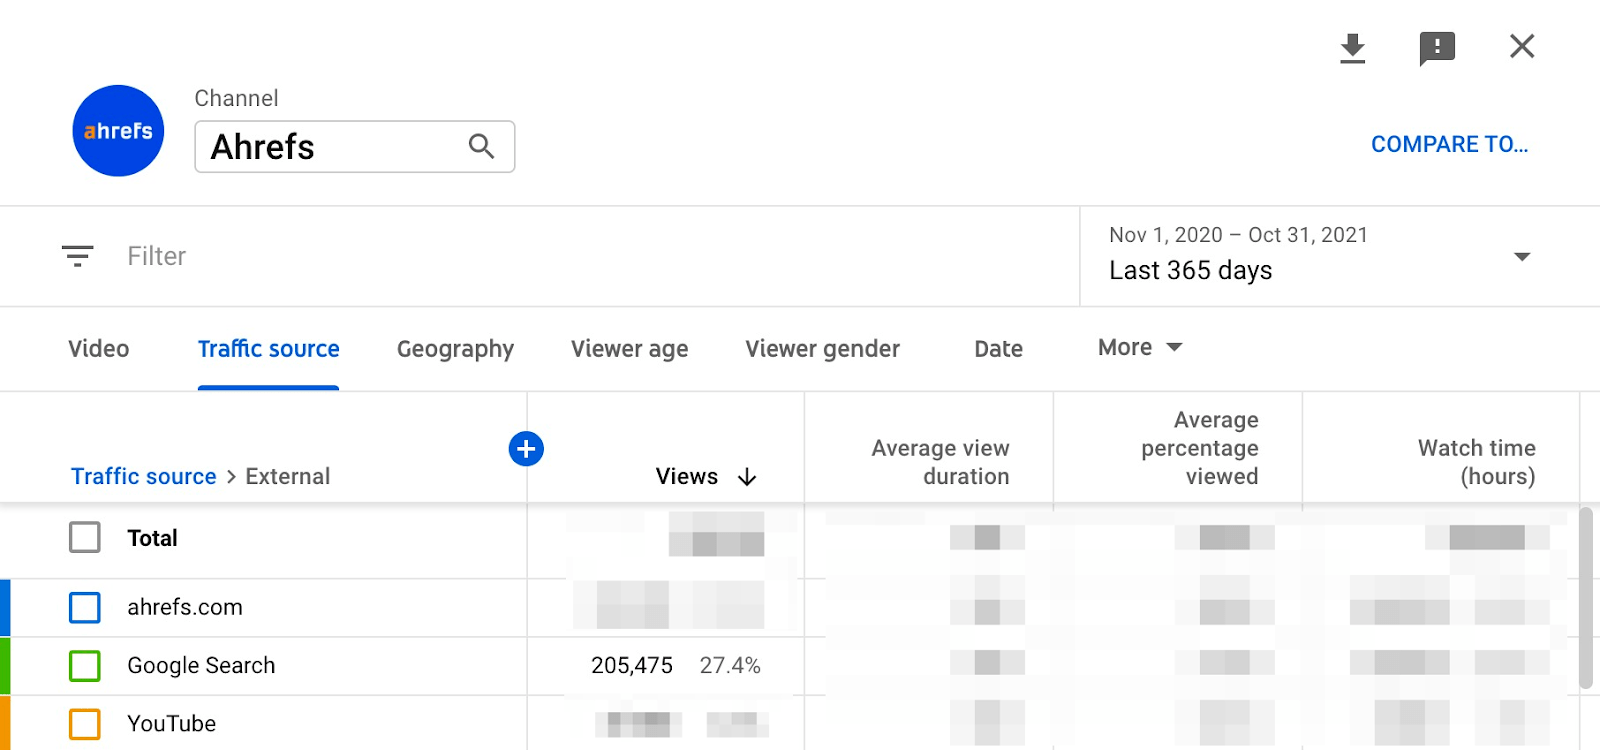 Table showing data on Ahrefs' Youtube channel